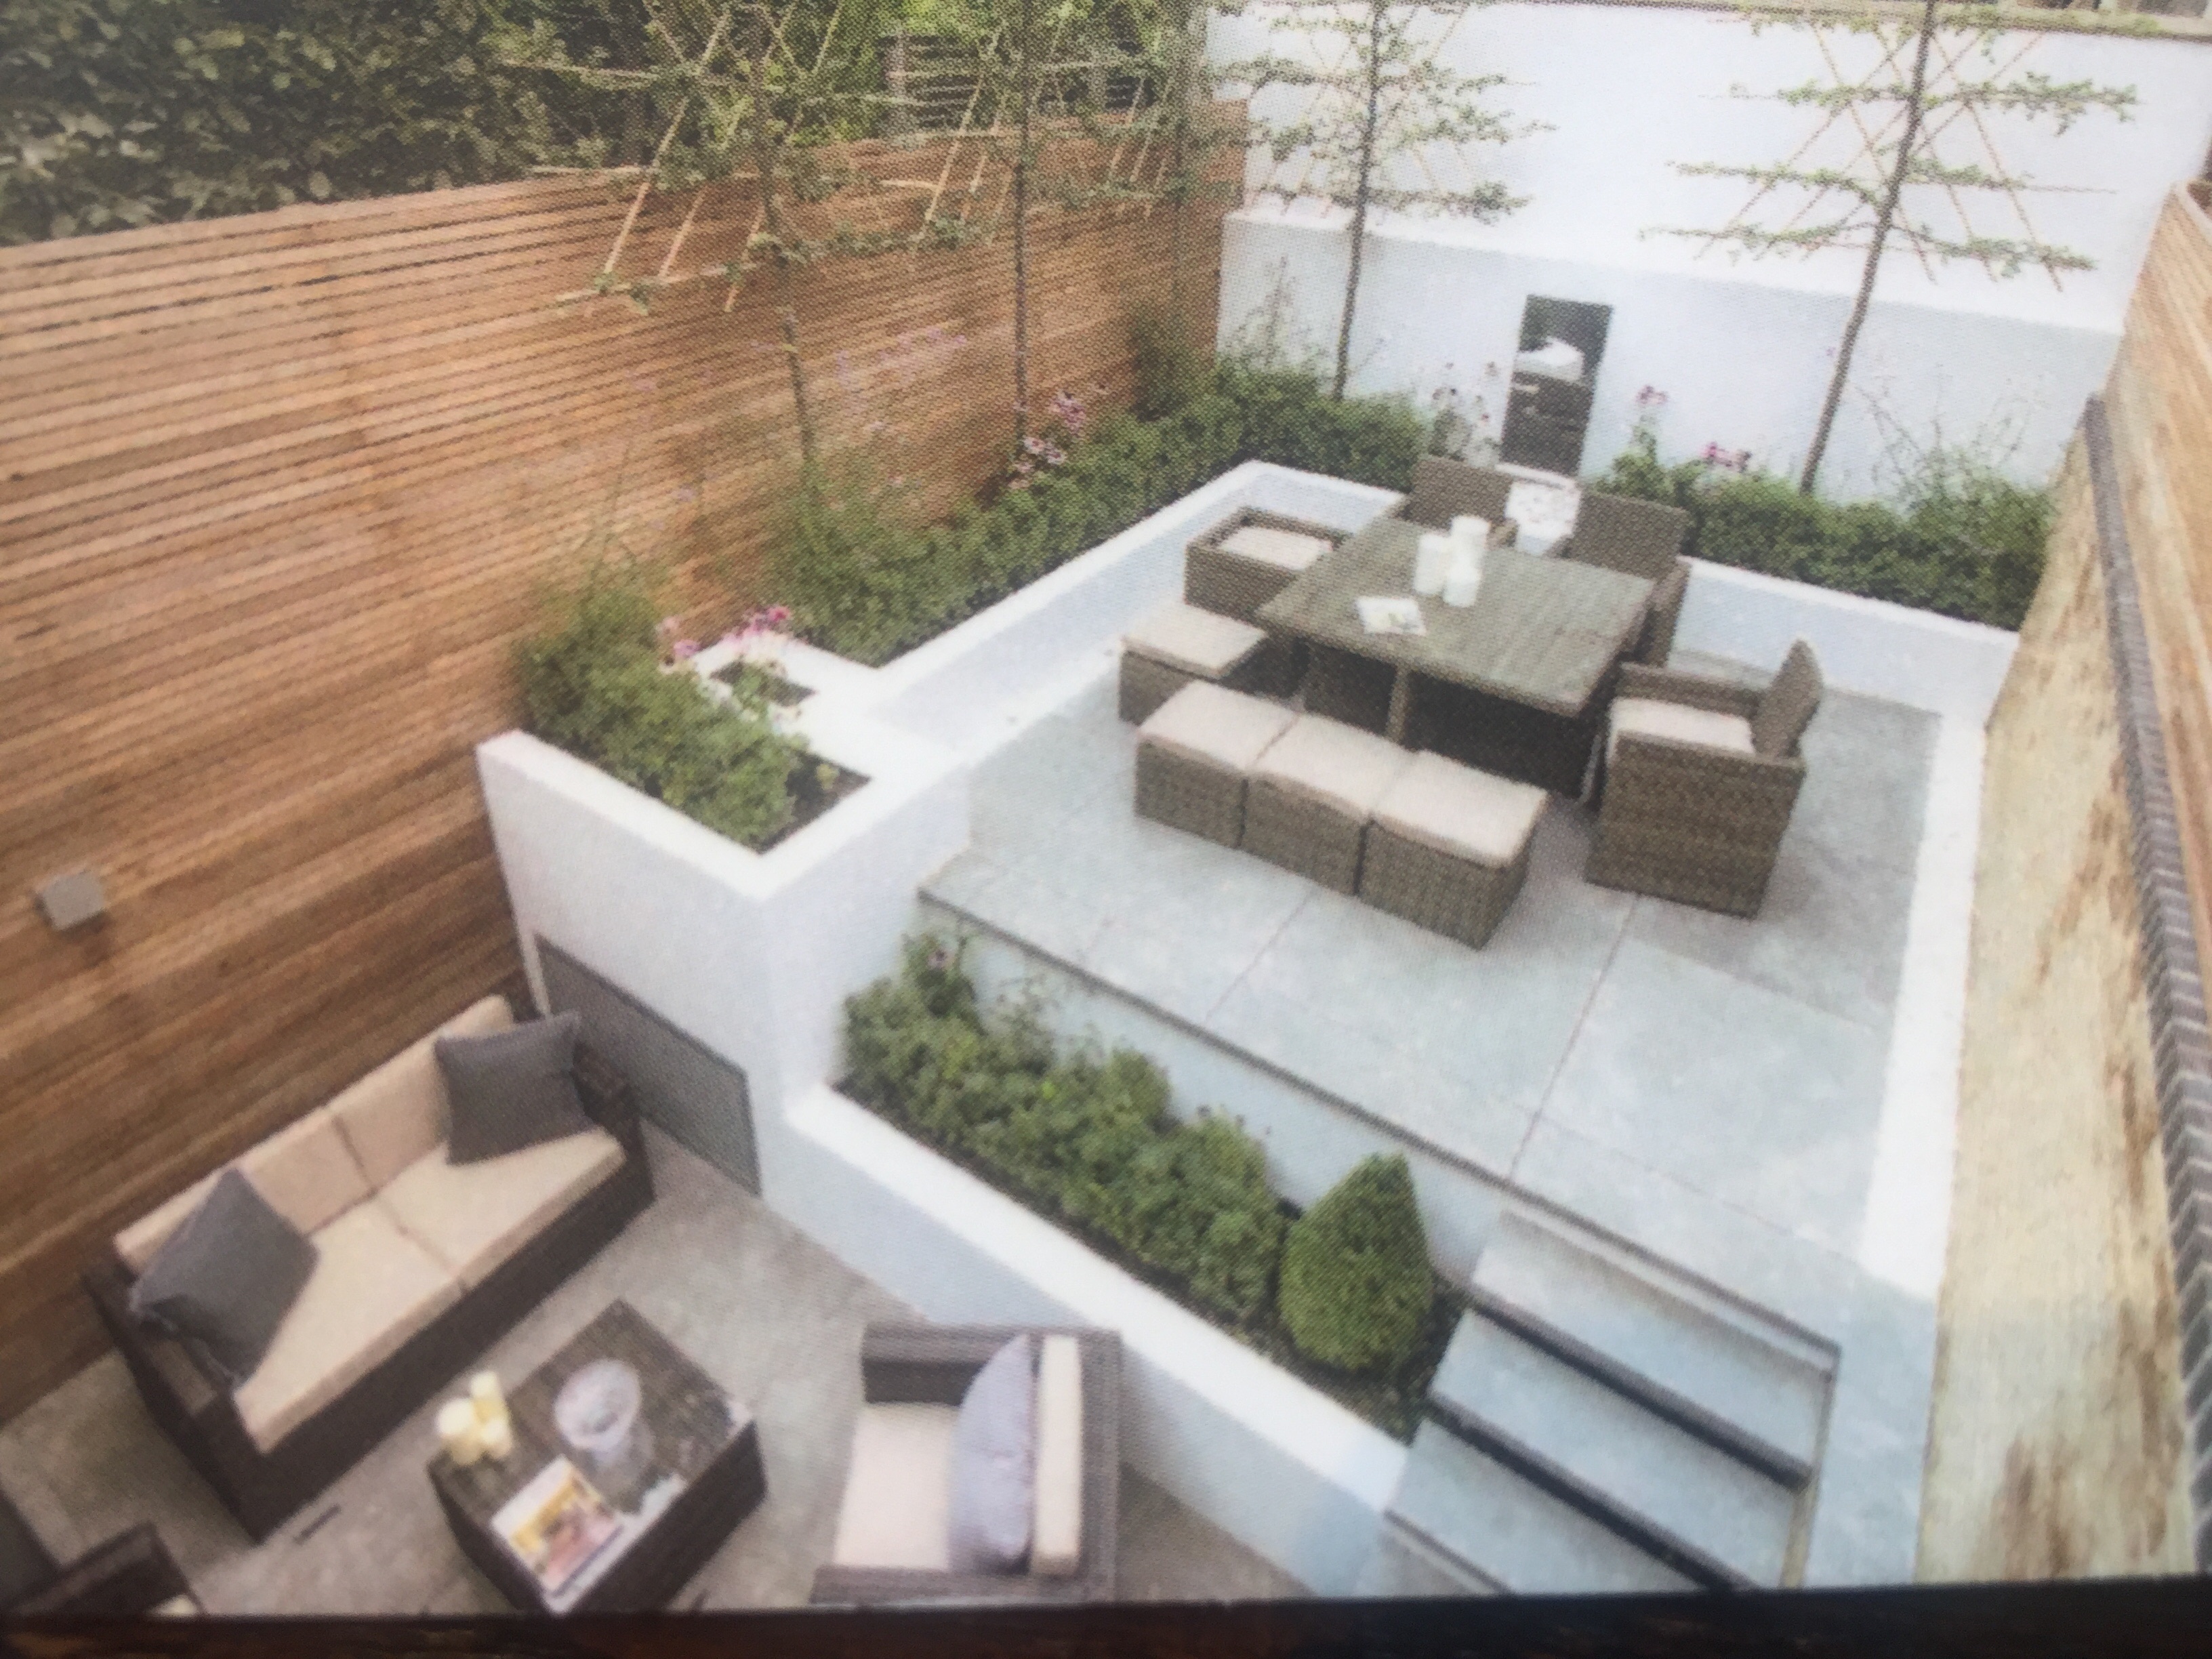 </p> <p>Find your ideal home design pro on designfor-me.com - get matched and see who's interested in your home project. Click image to see more inspiration from our design pros</p> <p>Design by Richard, garden designer from Milton Keynes, South East</p> <p> #gardendesign #gardeninspiration #gardenlove #gardenideas #gardens </p> <p>